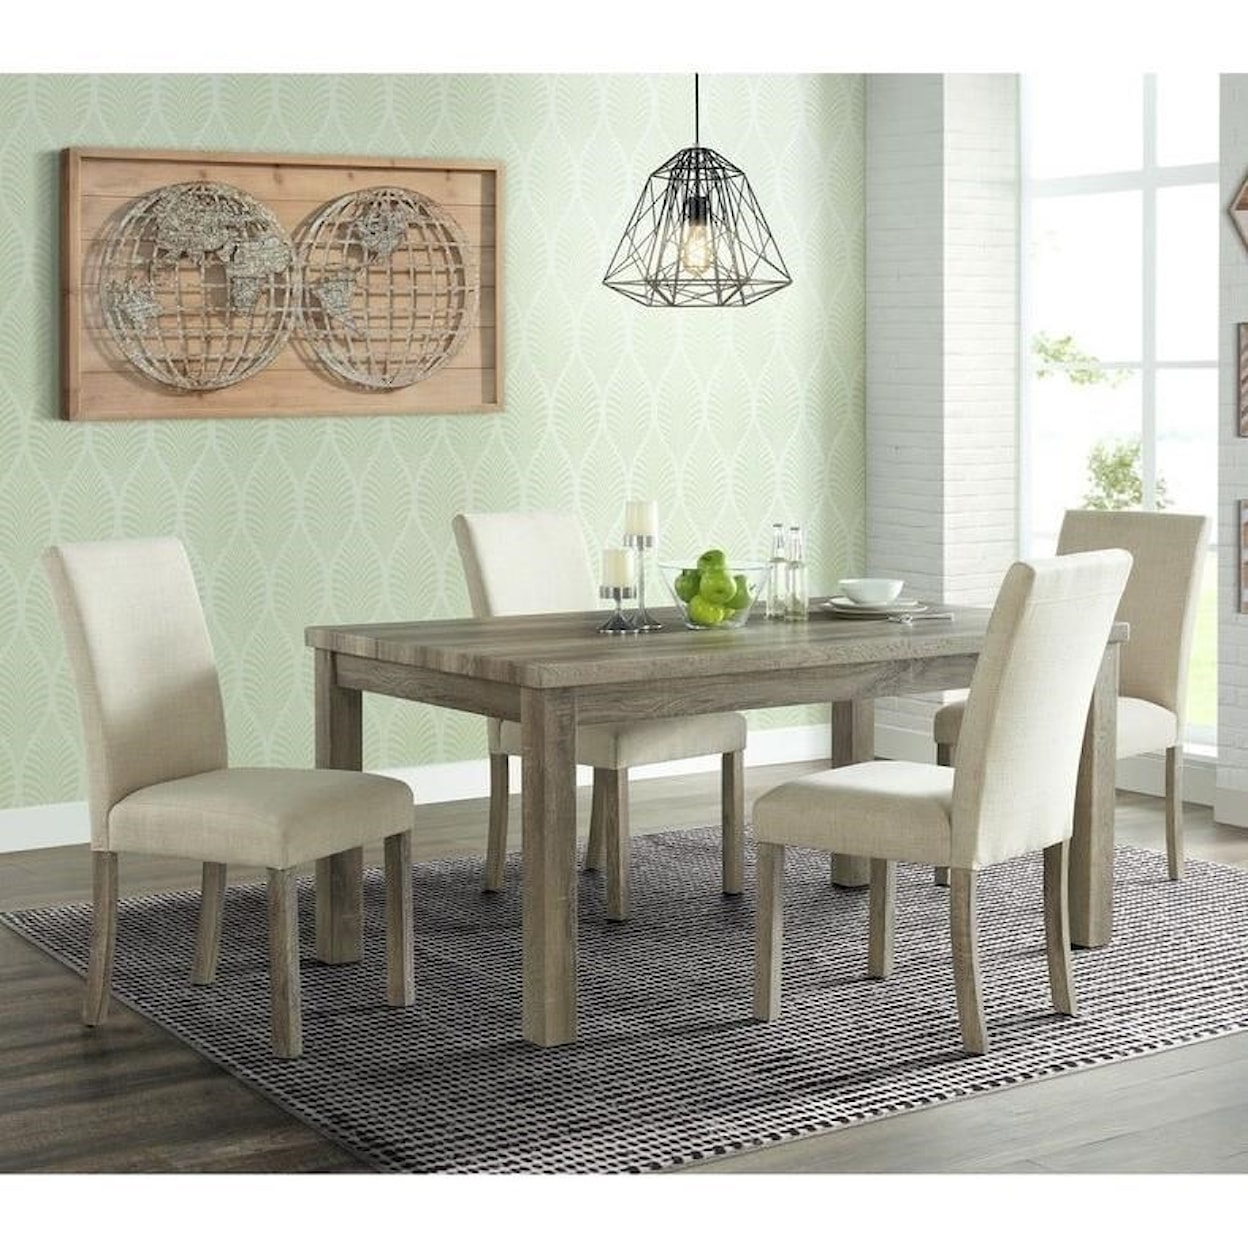 Elements Oak Lawn 5-Piece Table and Chair Set